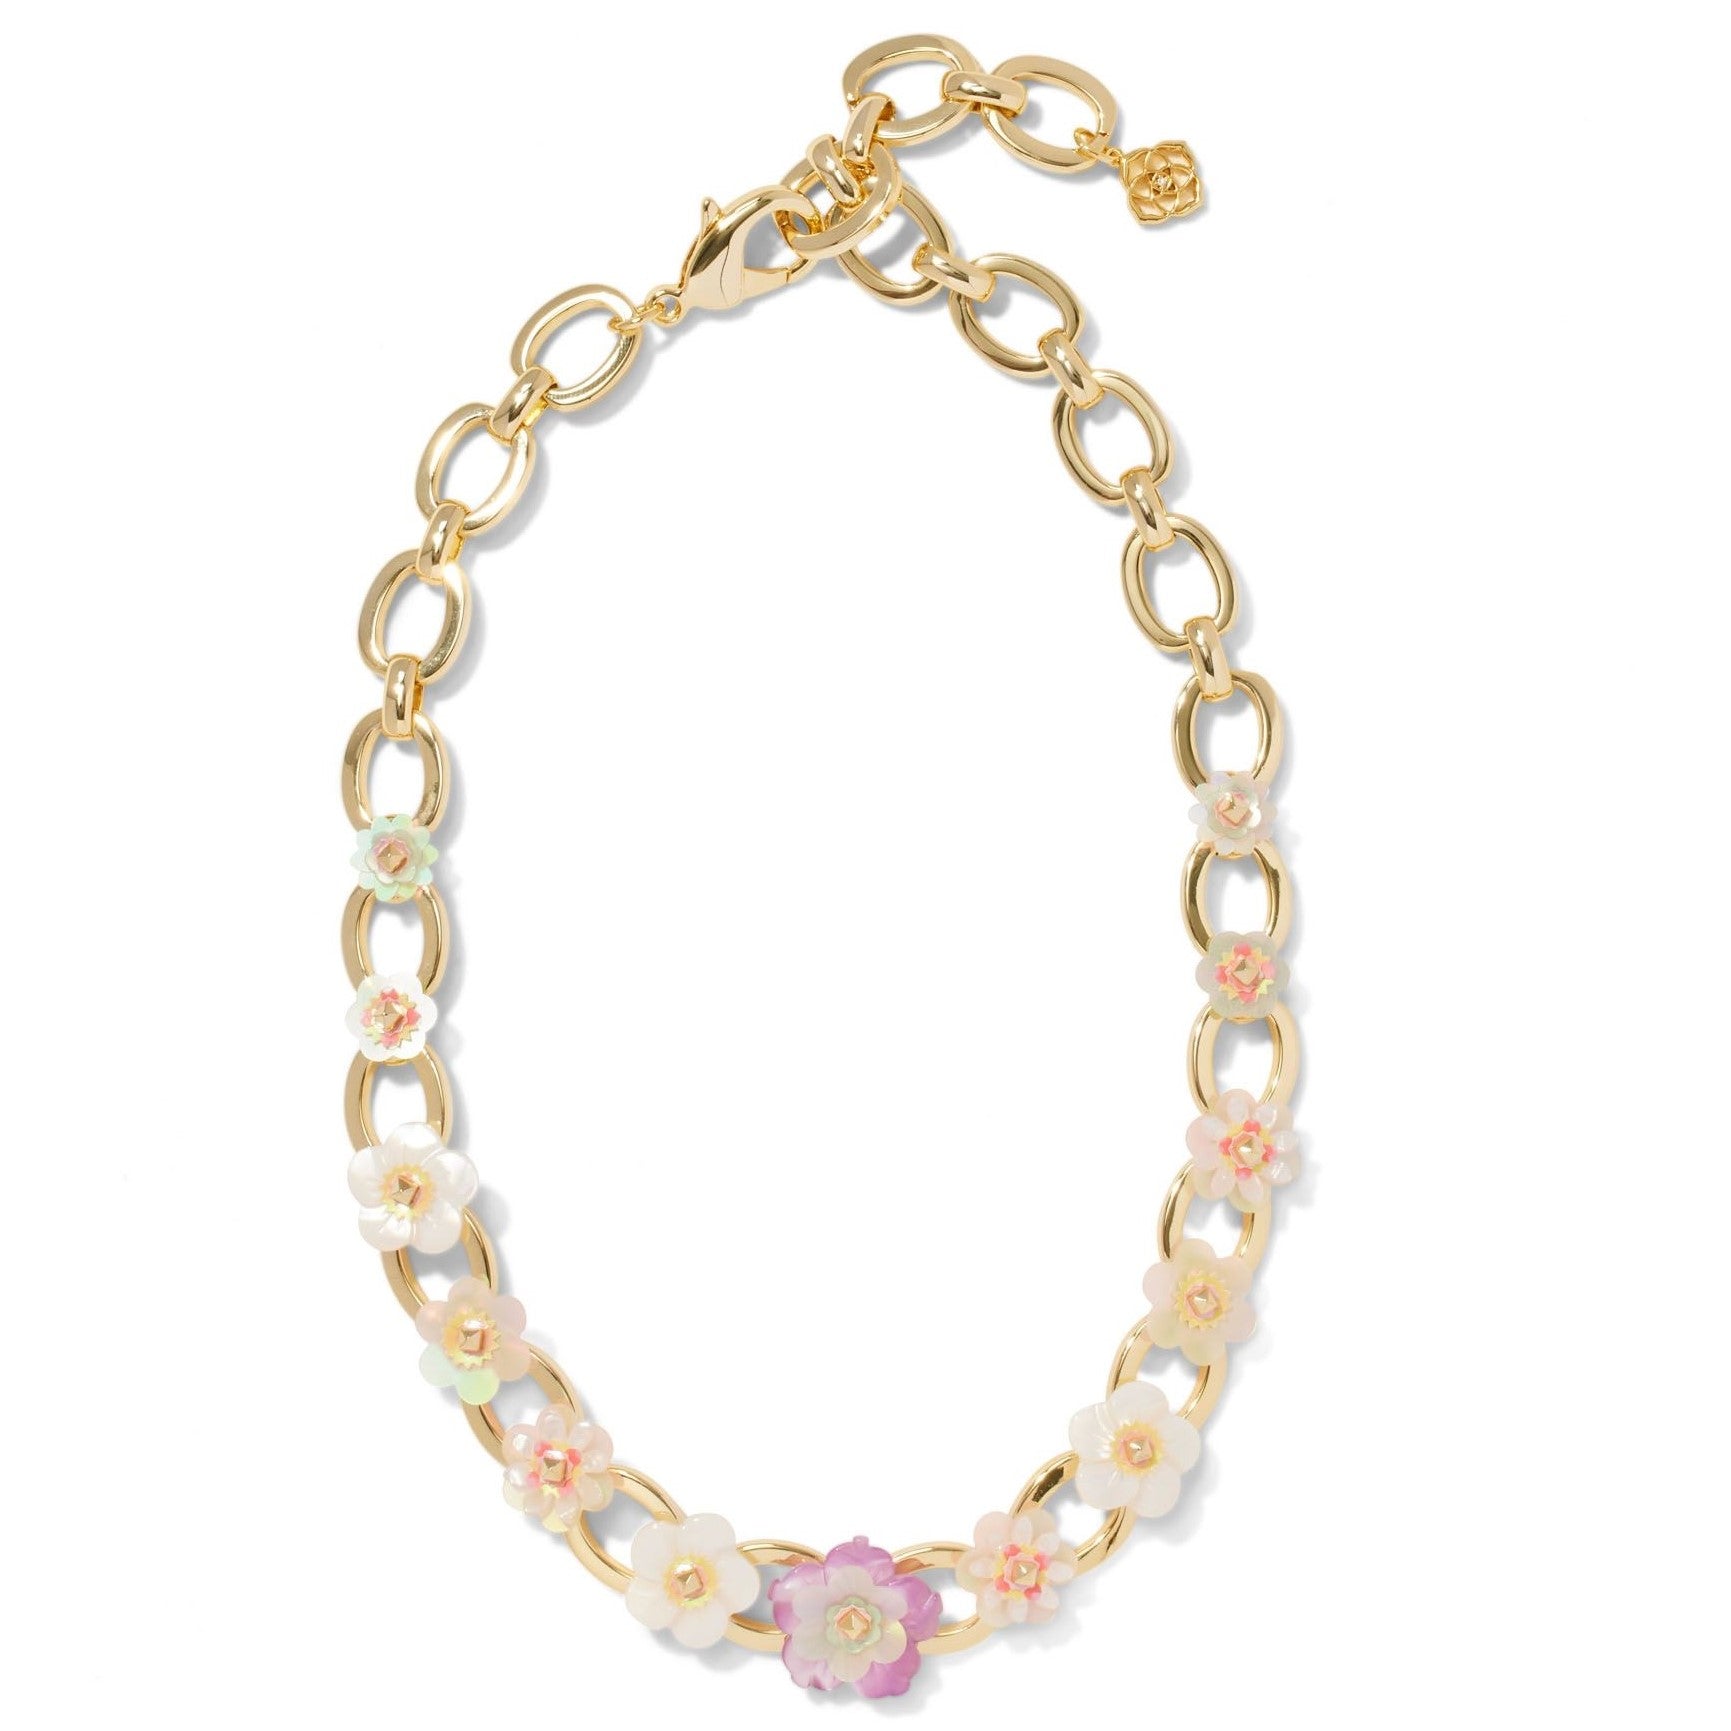 Kendra Scott | Deliah Gold Statement Necklace in Pastel Mix - Giddy Up Glamour Boutique